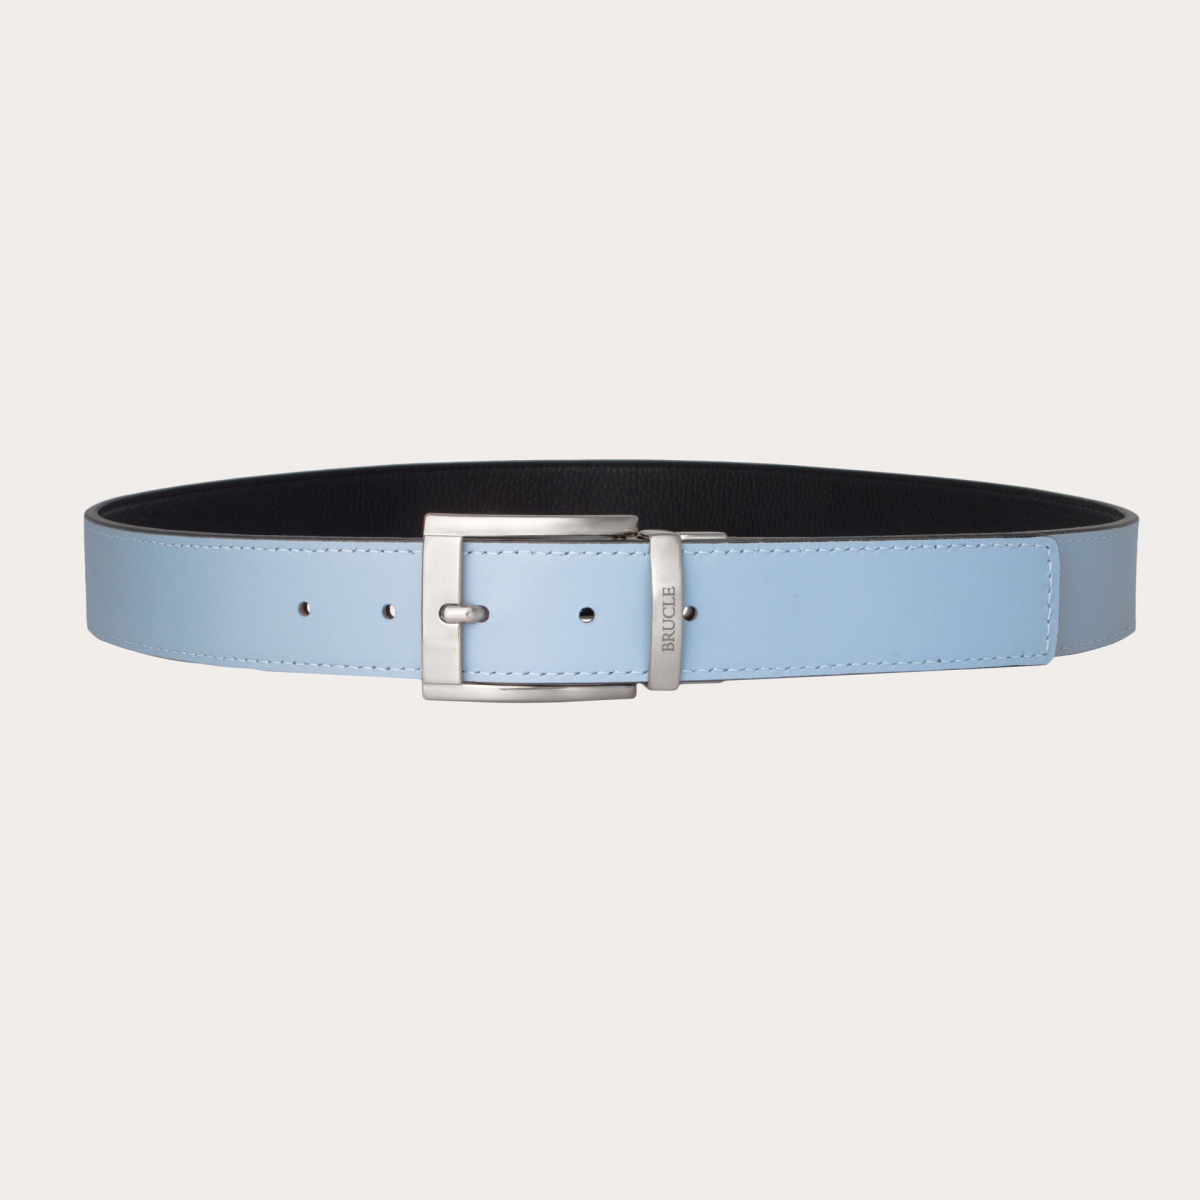 BRUCLE Reversible leather belt black and blue sky square tip